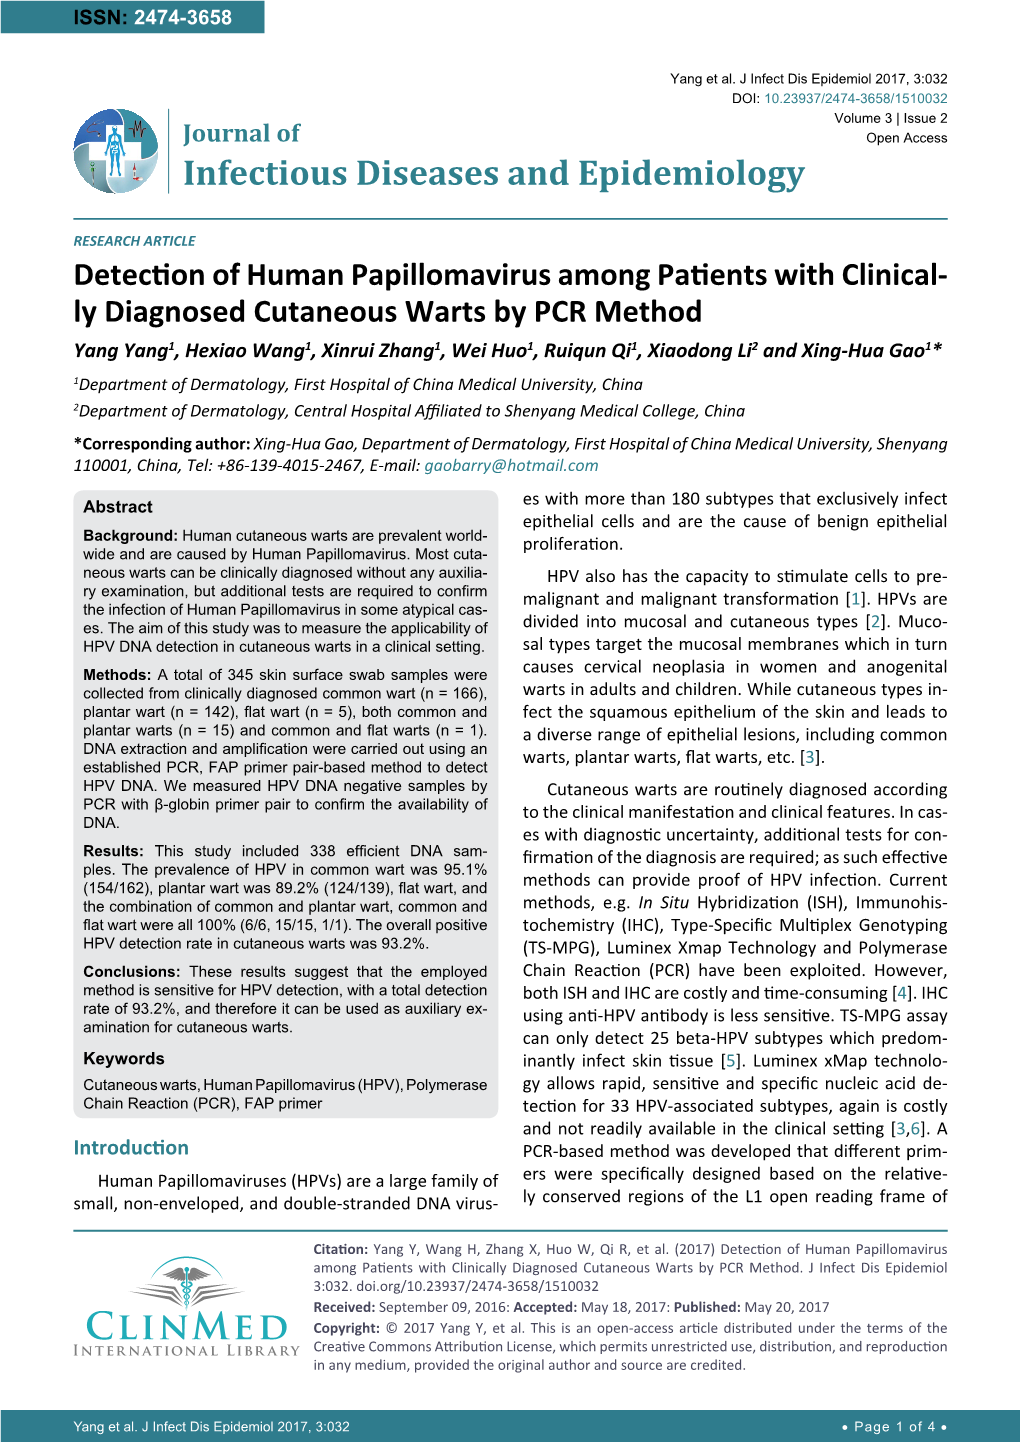 Detection of Human Papillomavirus Among Patients with Clinically Diagnosed Cutaneous Warts by PCR Method